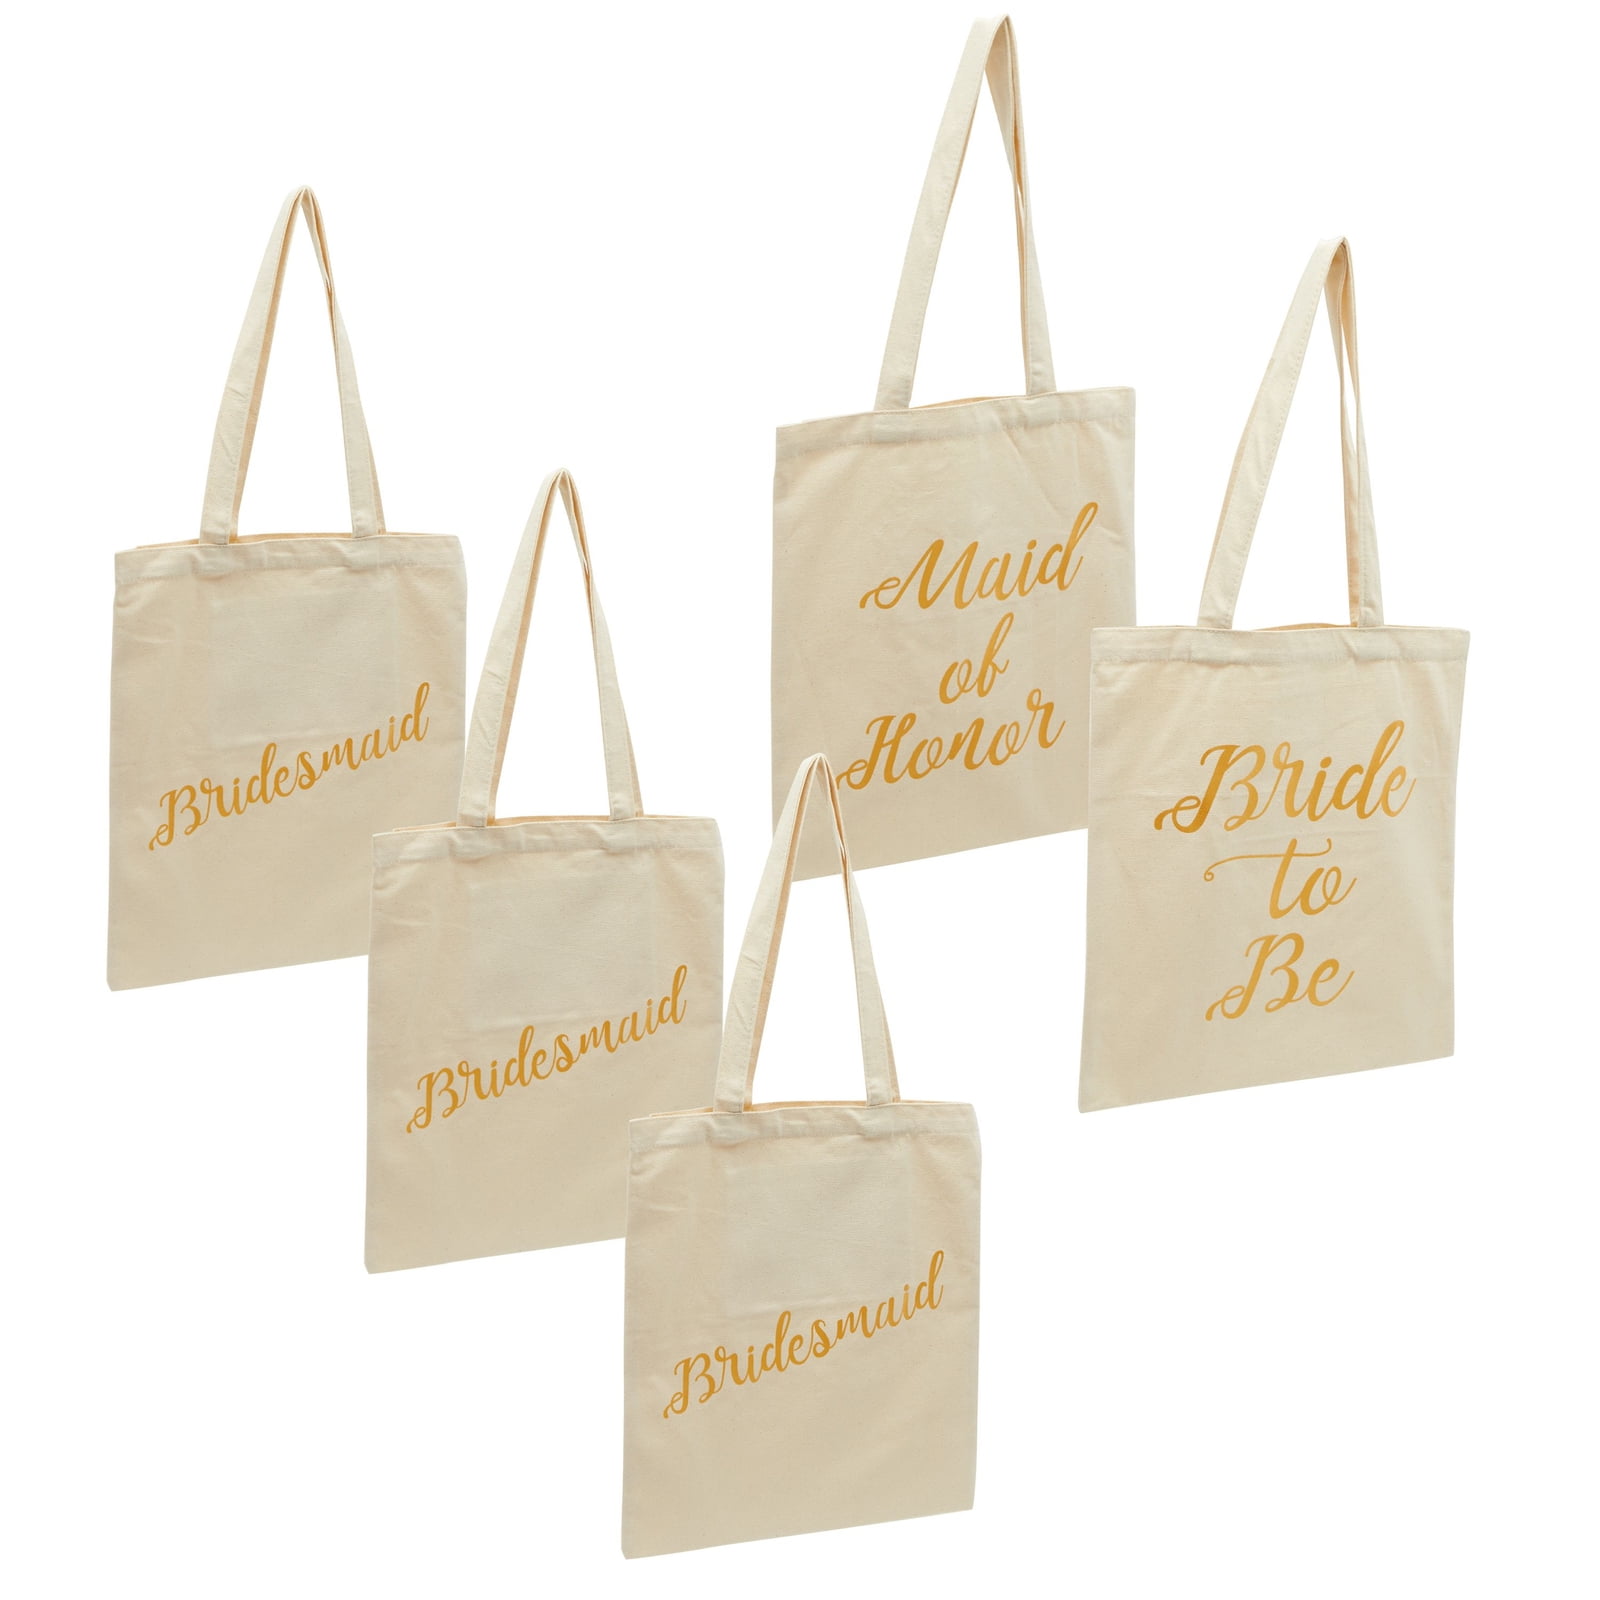 Personalised The New Mrs Bride Beach Bag & Makeup Purse Gift Set Cotton Rope 